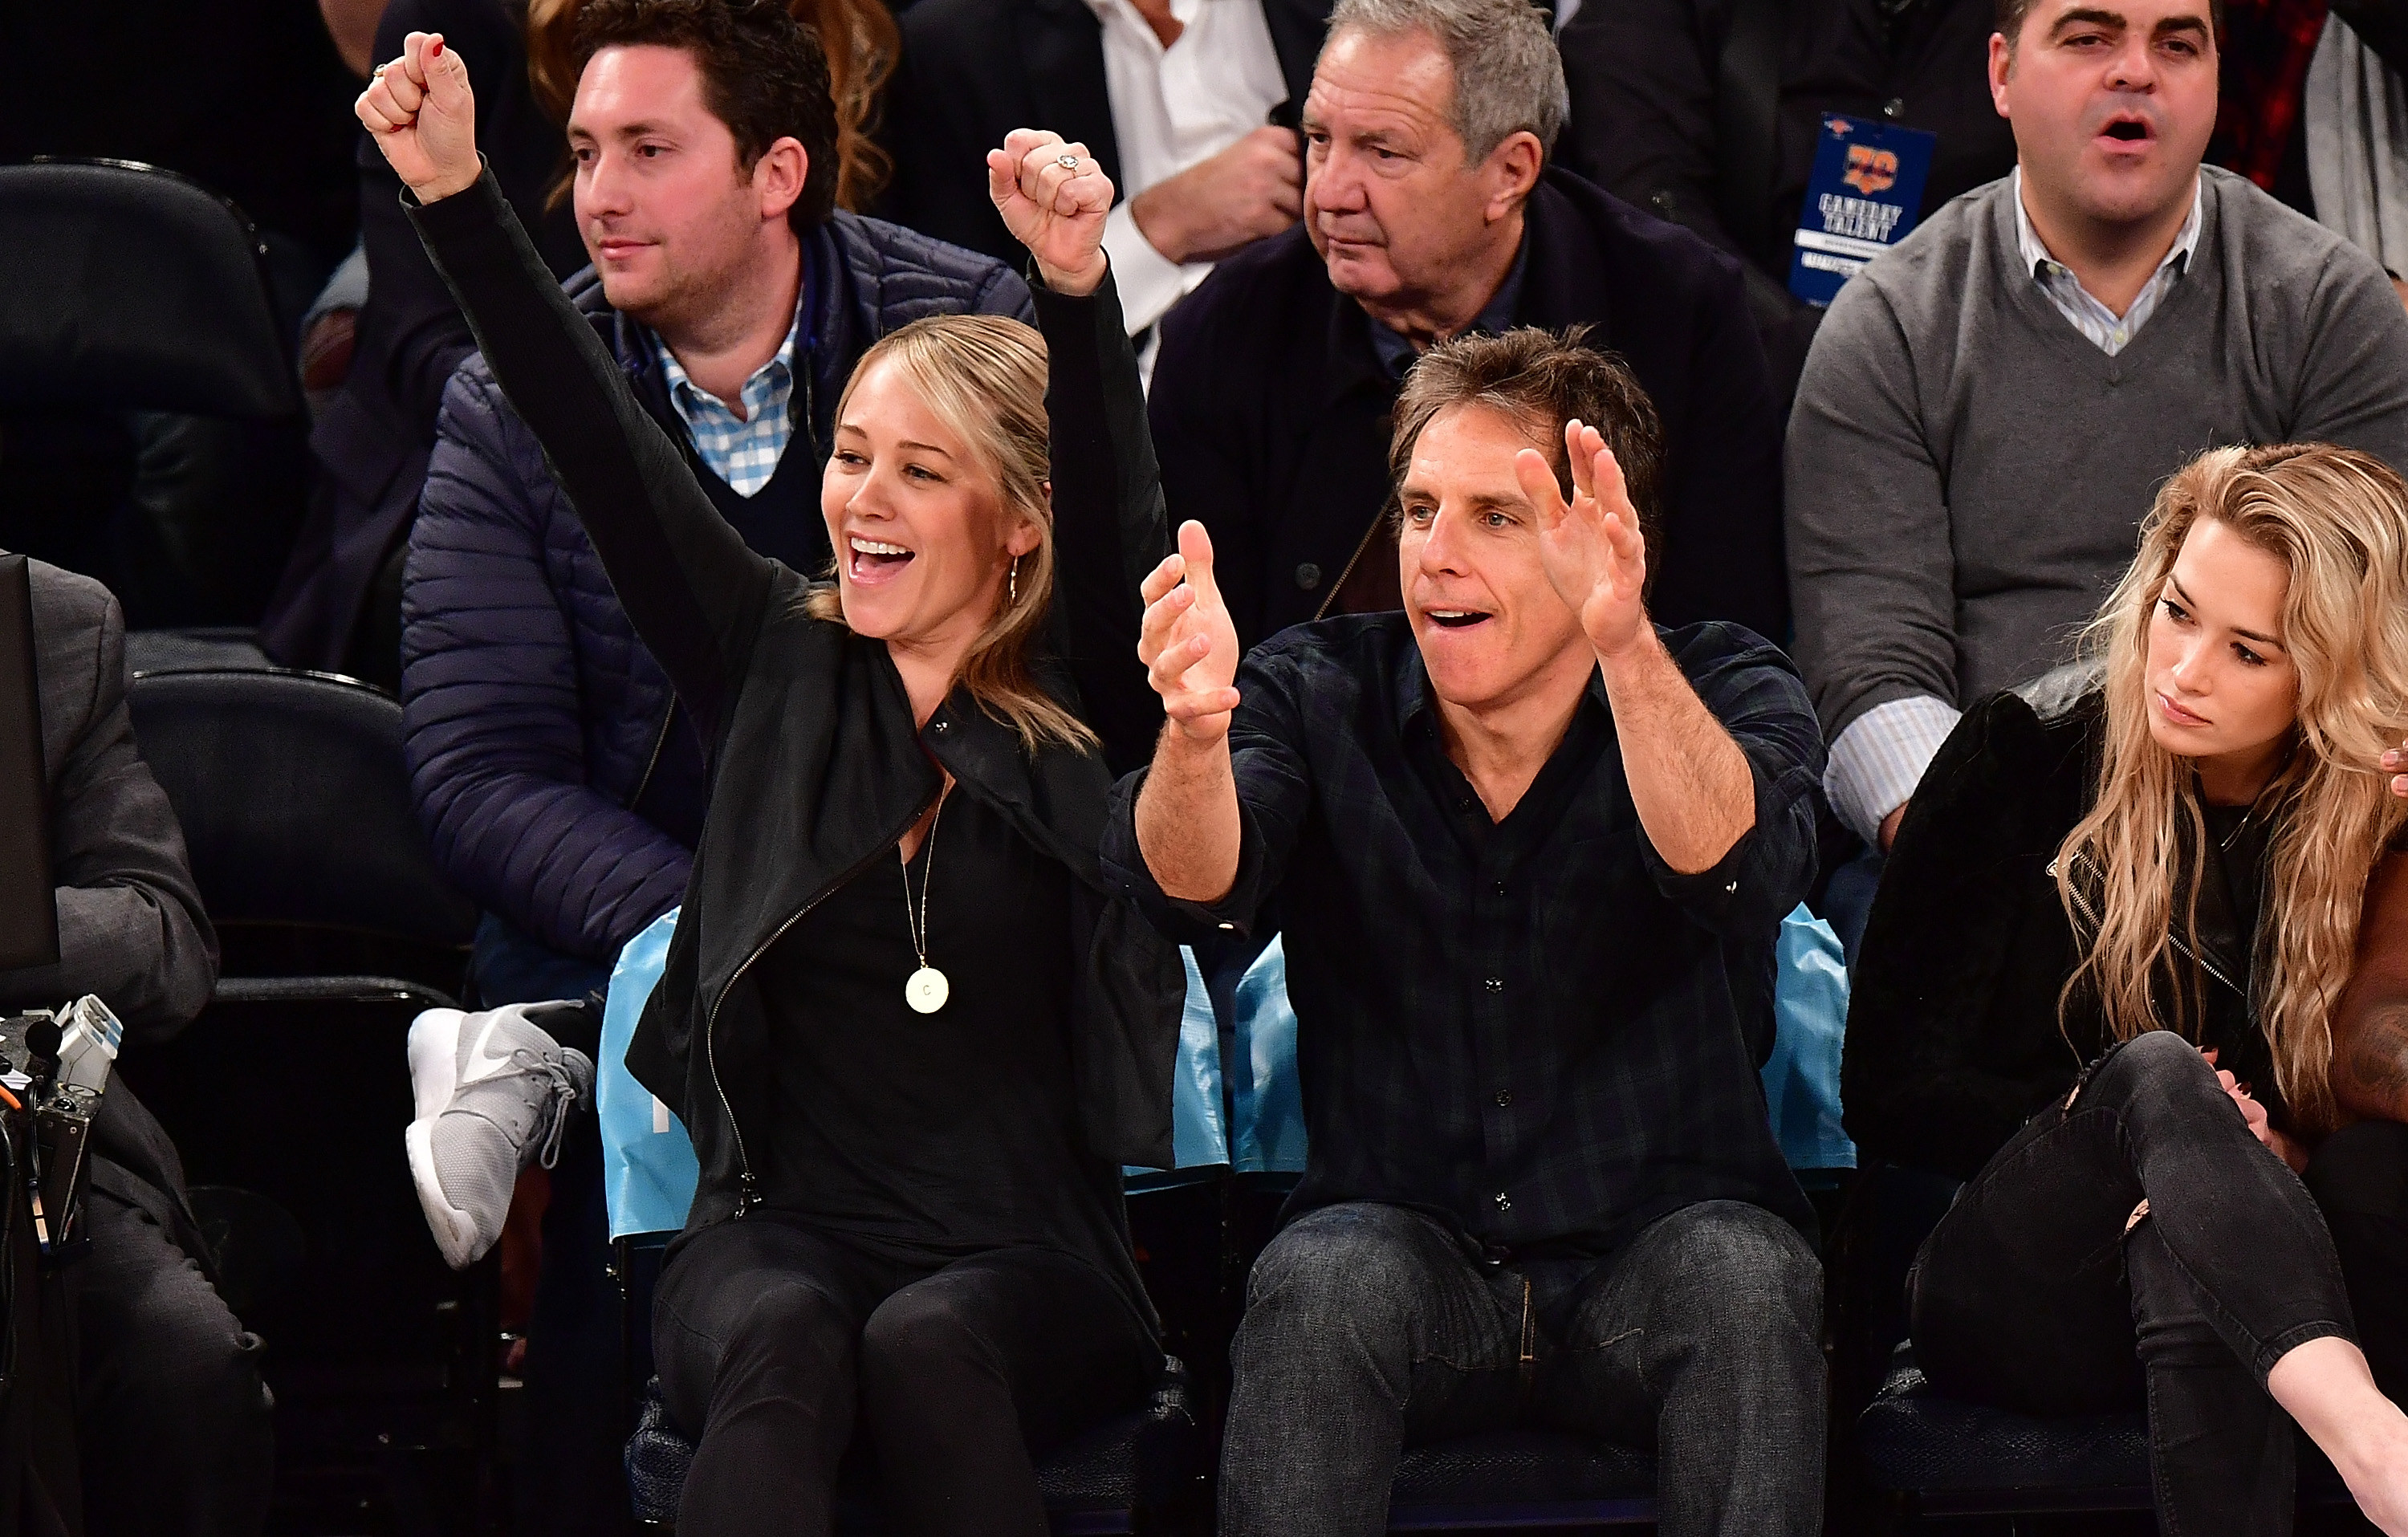 Christine and Ben cheer at a basketball game